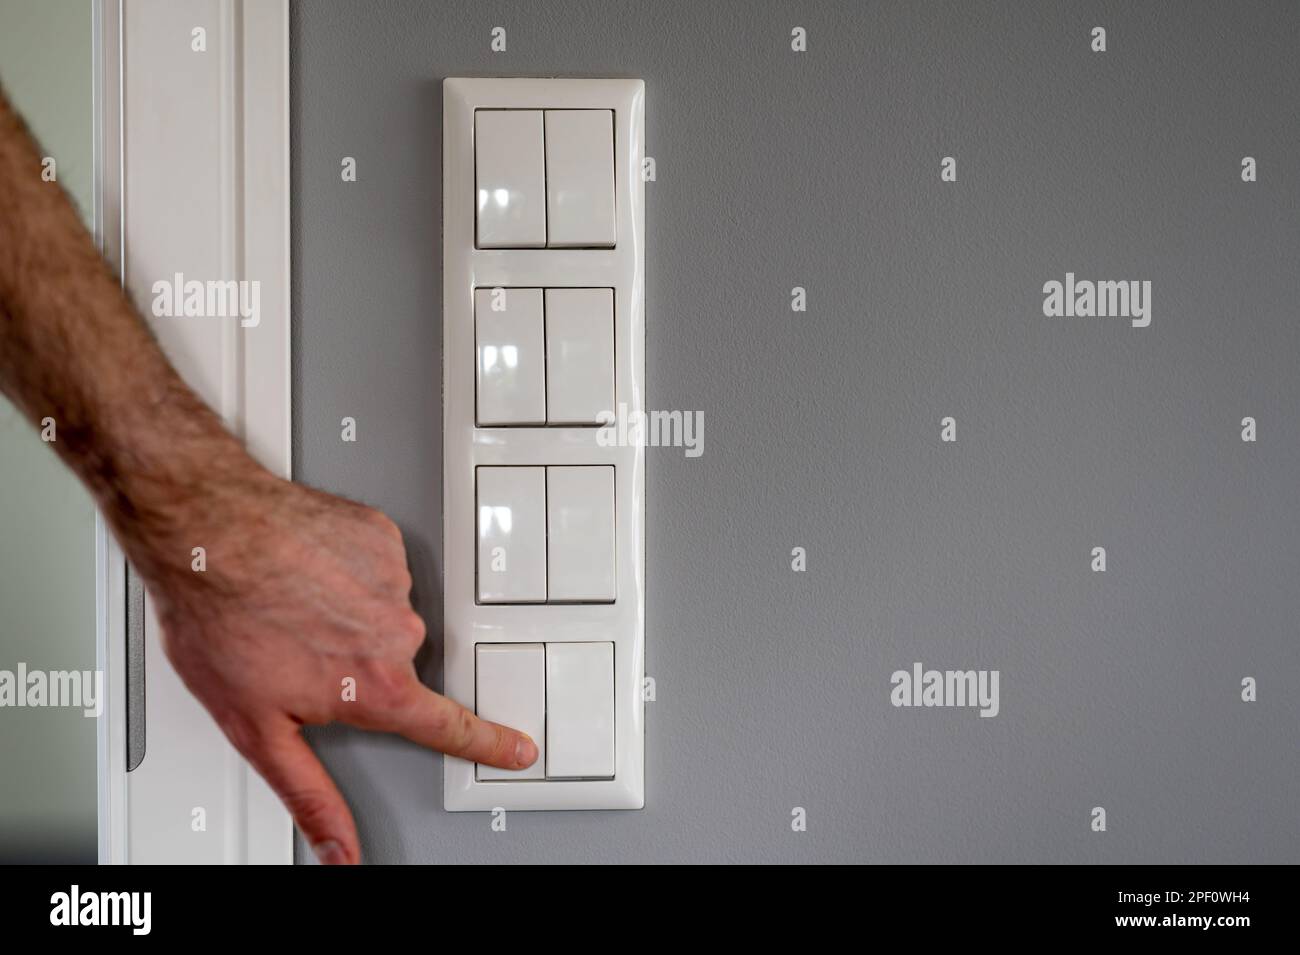 Row of eight light switches, while a finger switches on one light switch. Stock Photo